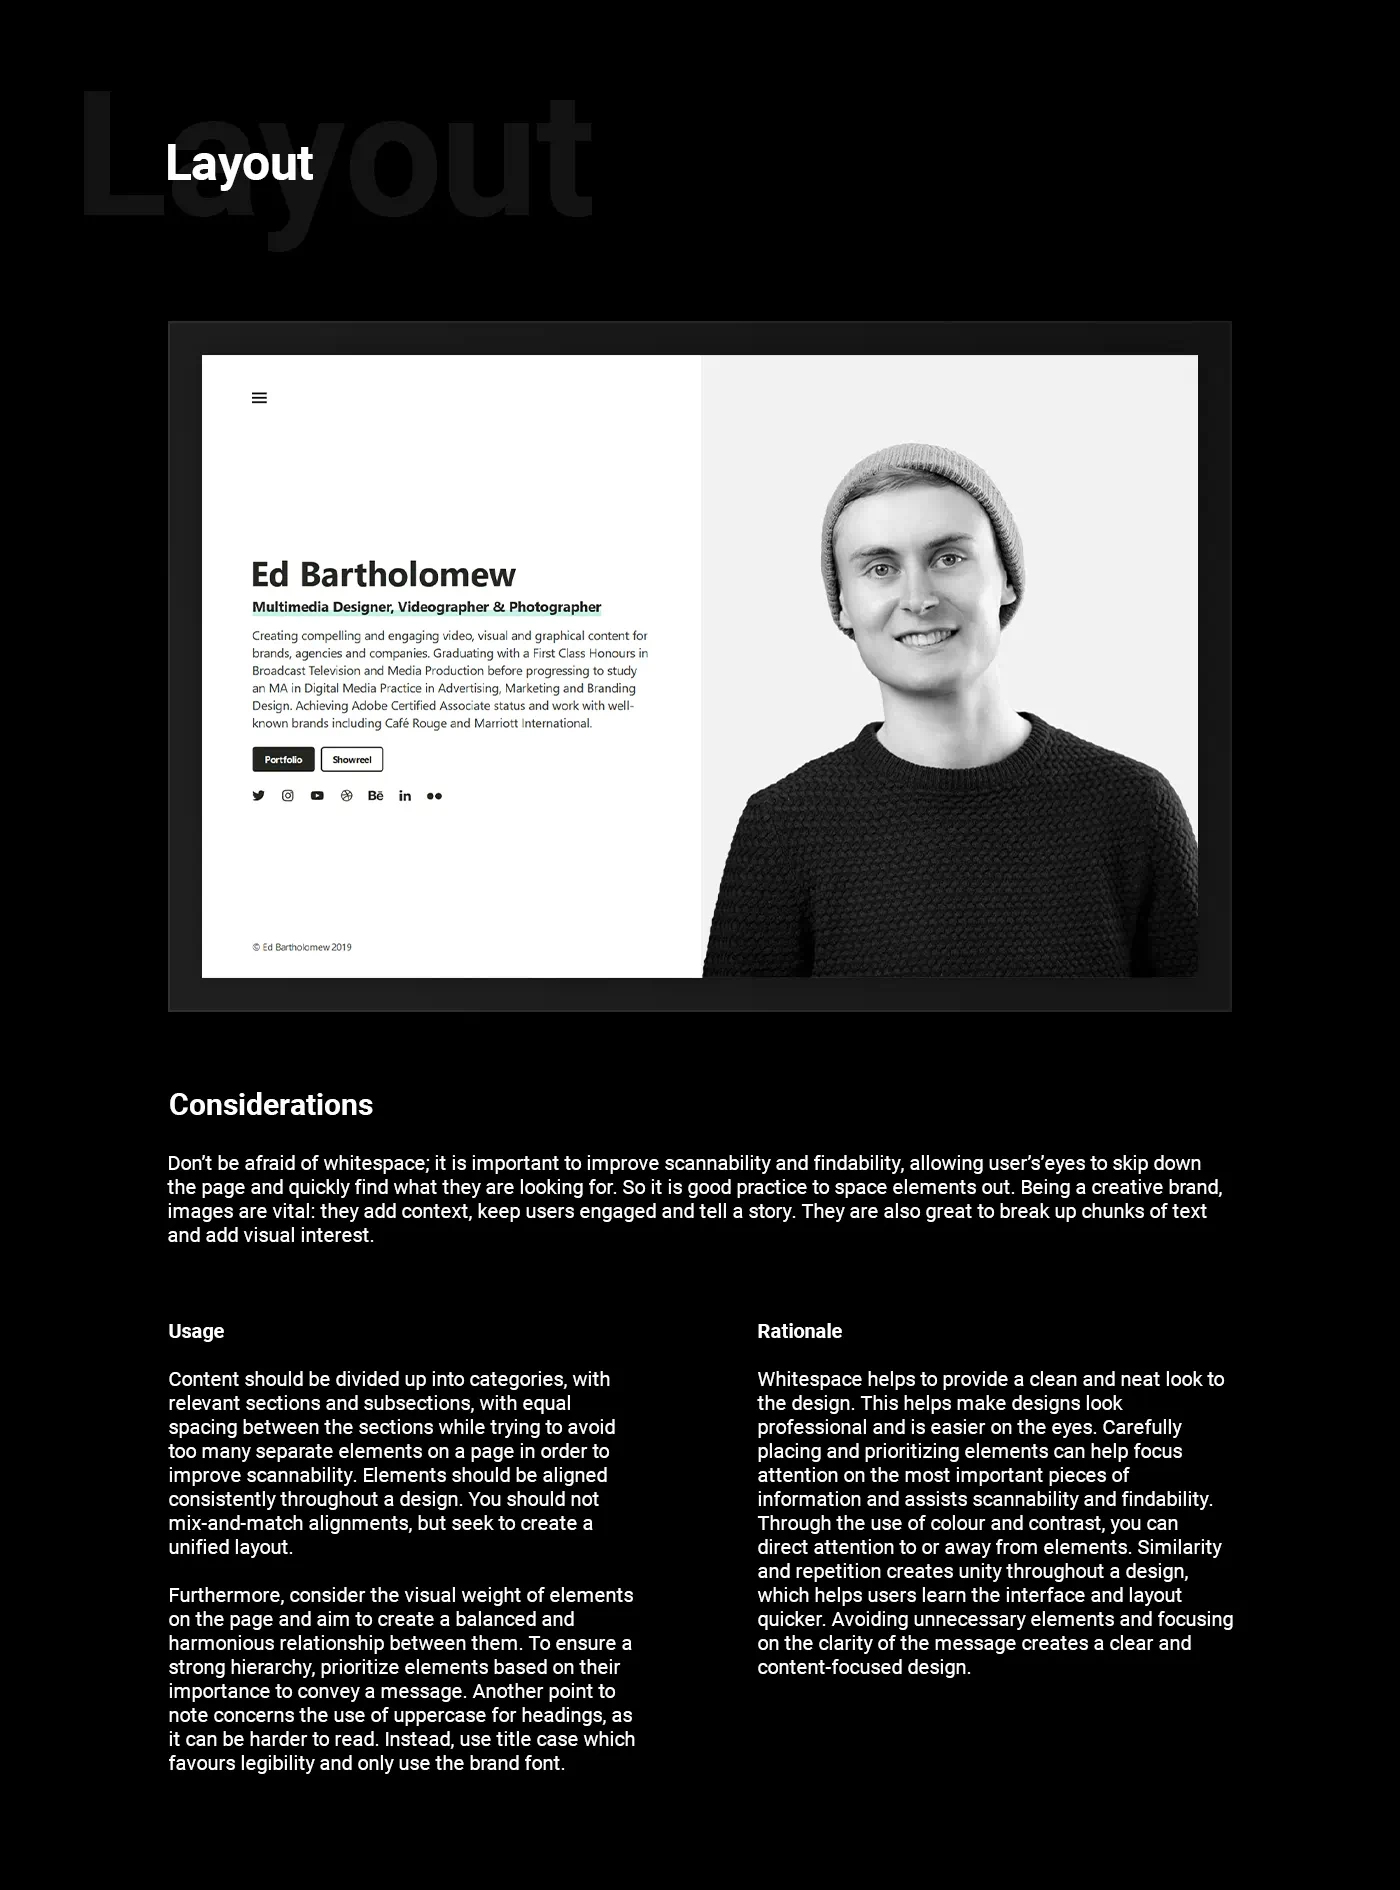 The layout page describes the style to be used when designing content for the brand